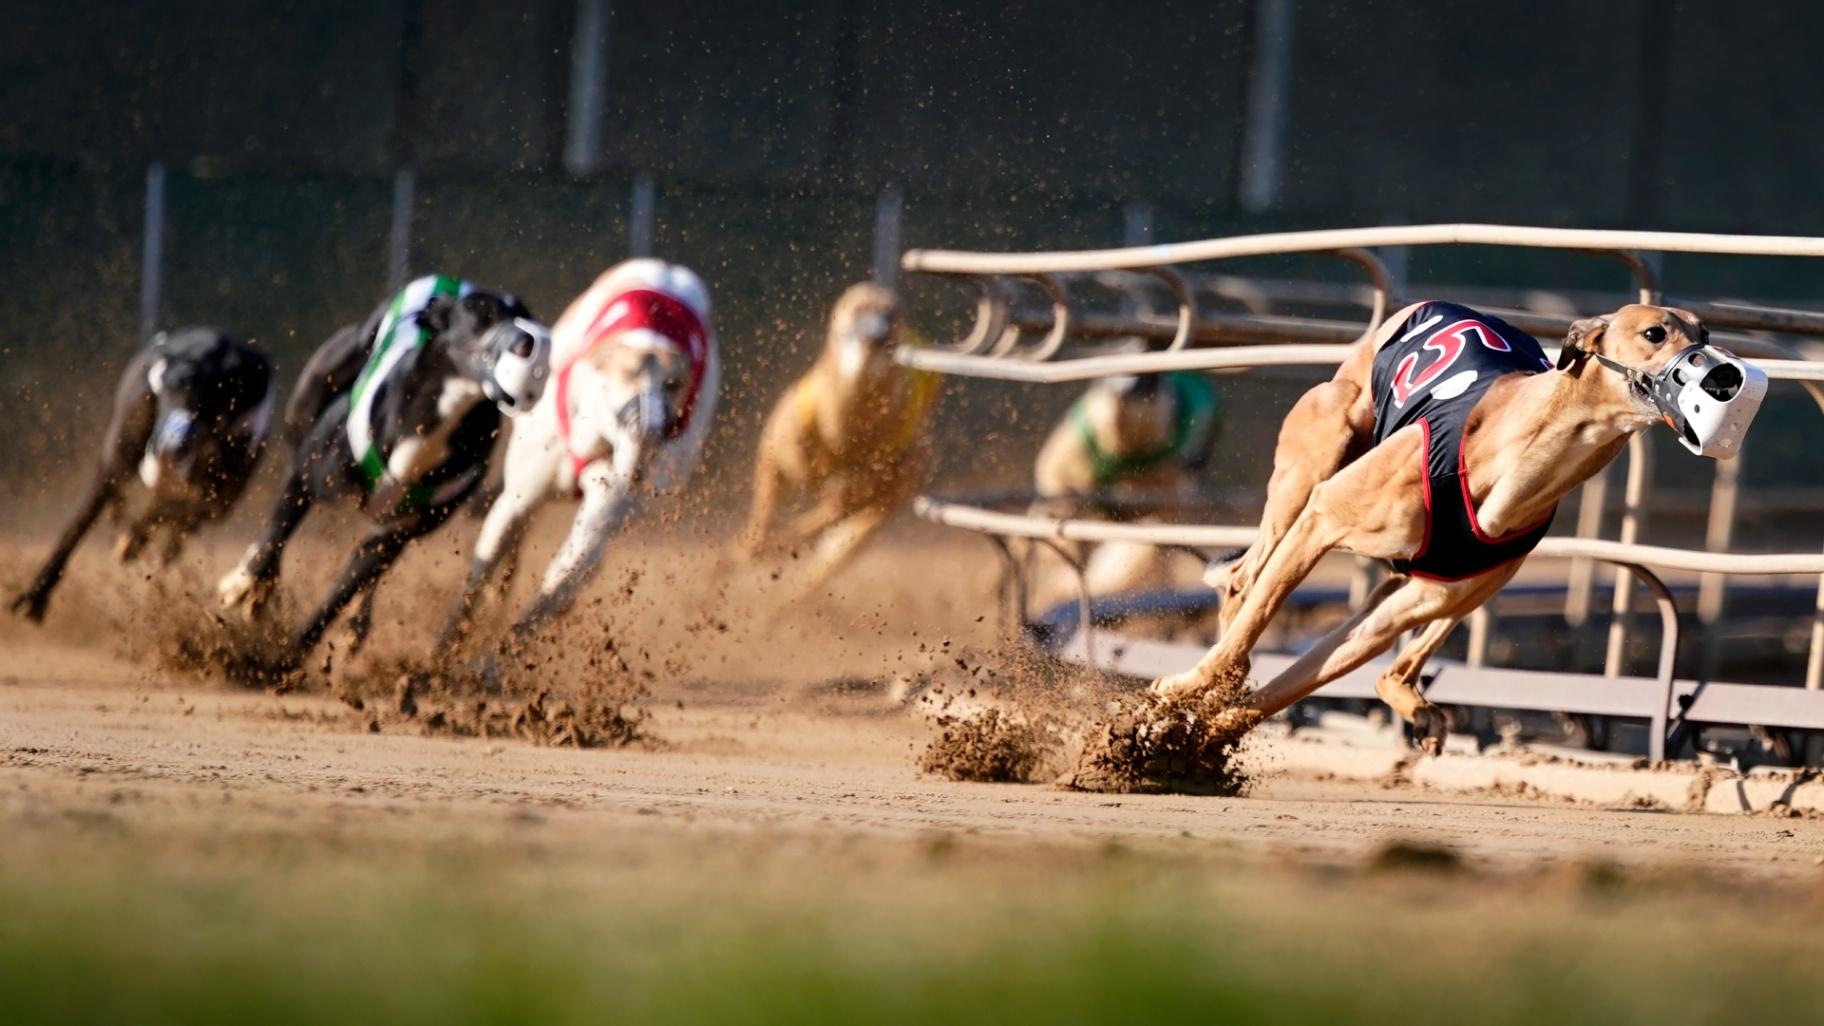 Greyhounds compete in a race at the Iowa Greyhound Park, Saturday, April 16, 2022, in Dubuque, Iowa. (AP Photo / Charlie Neibergall)